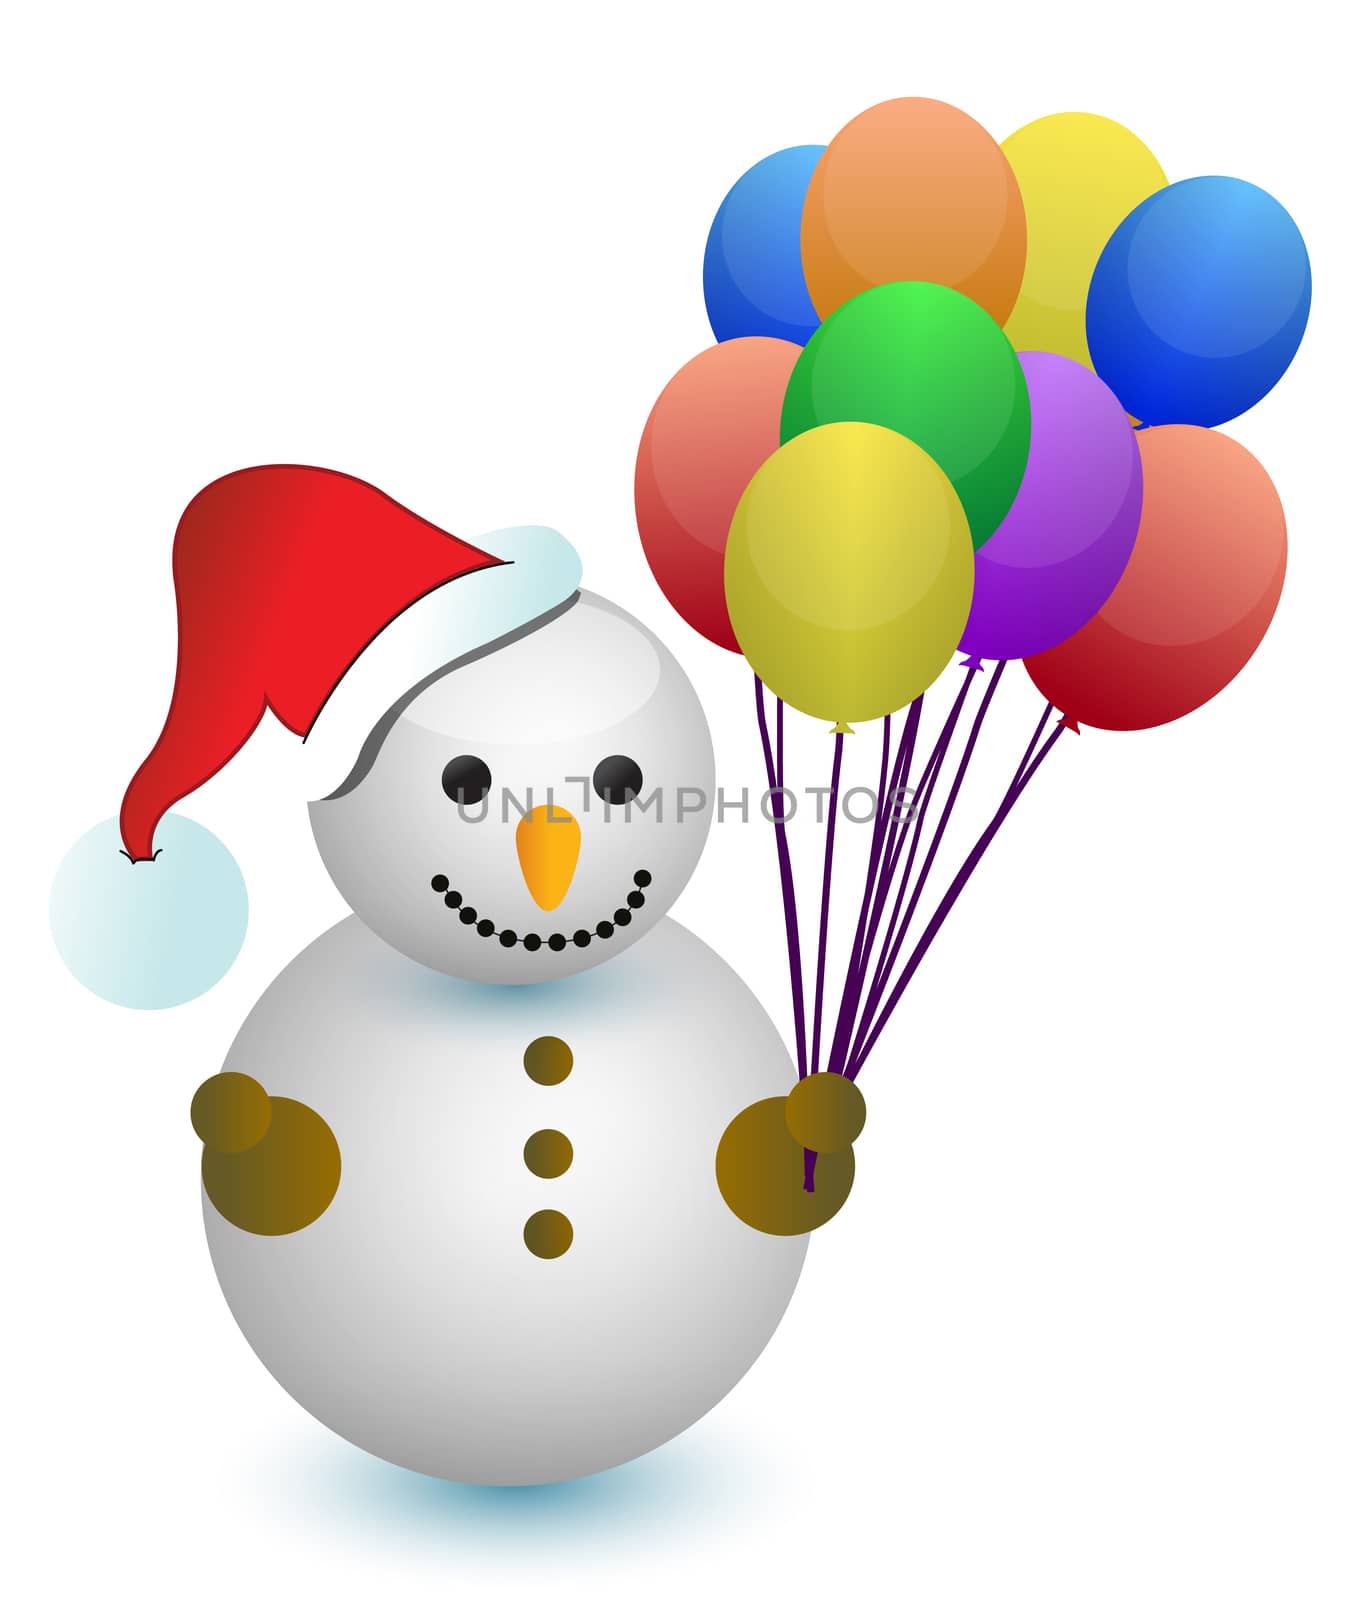 snowman holding balloons illustration design on white by alexmillos